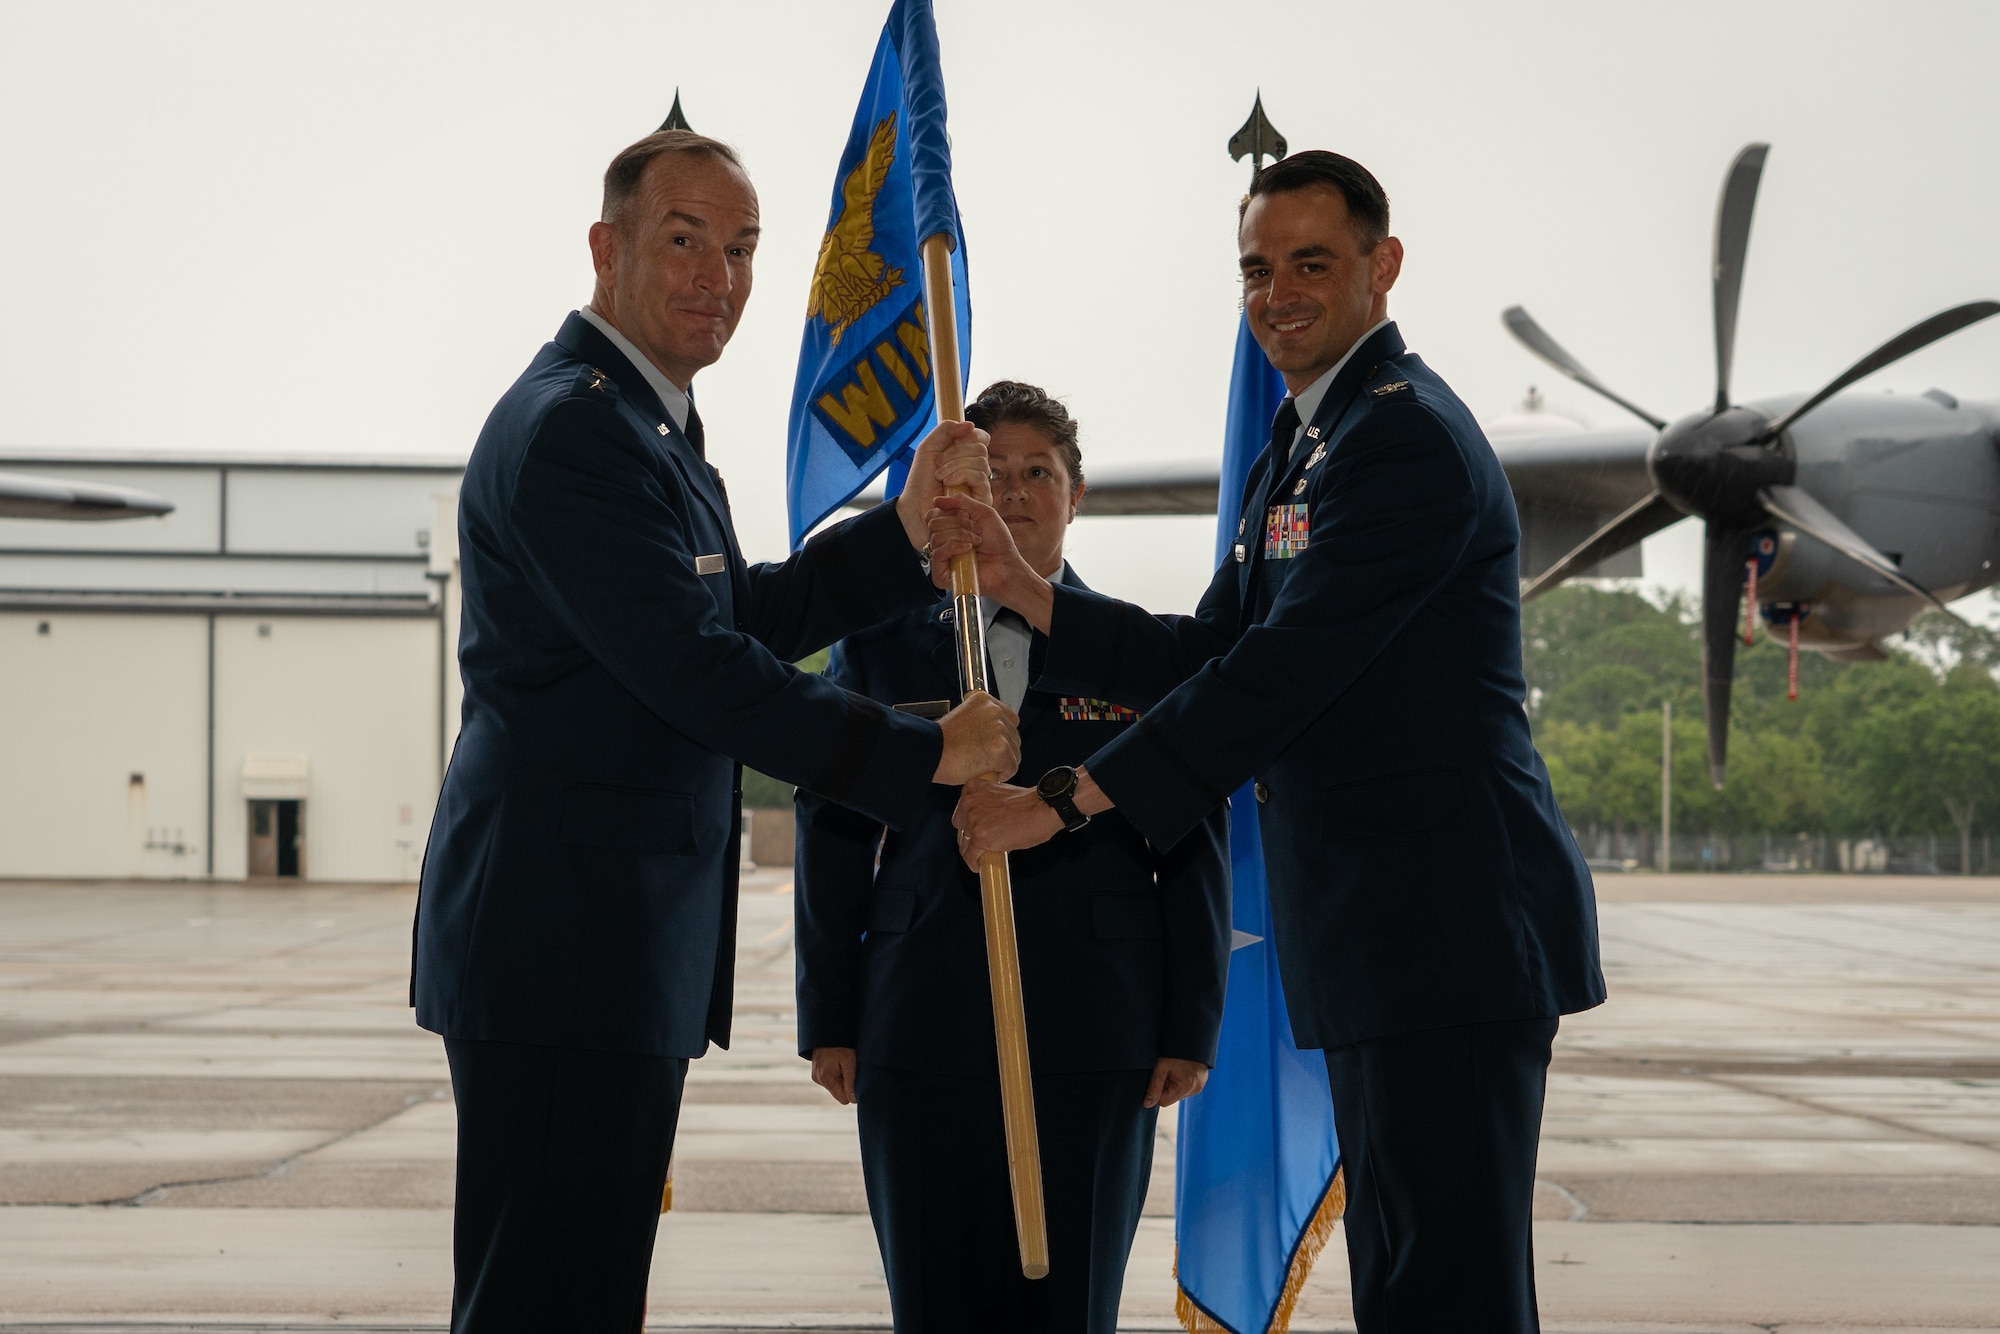 Col. Stuart M. Rubio assumed command of the 403rd Wing at Keesler Air Force Base, Miss., June 5, 2021. He will lead 1,900 Reserve Citizen Airmen and civilian professionals who train, equip, and employ airlift forces in support of the nation’s interests. This includes the only weather reconnaissance mission in the Department of Defense in addition to tactical airlift and airdrop, aeromedical evacuation and agile combat support. (U.S. Air Force photo by Staff Sgt. Shelton Sherrill)